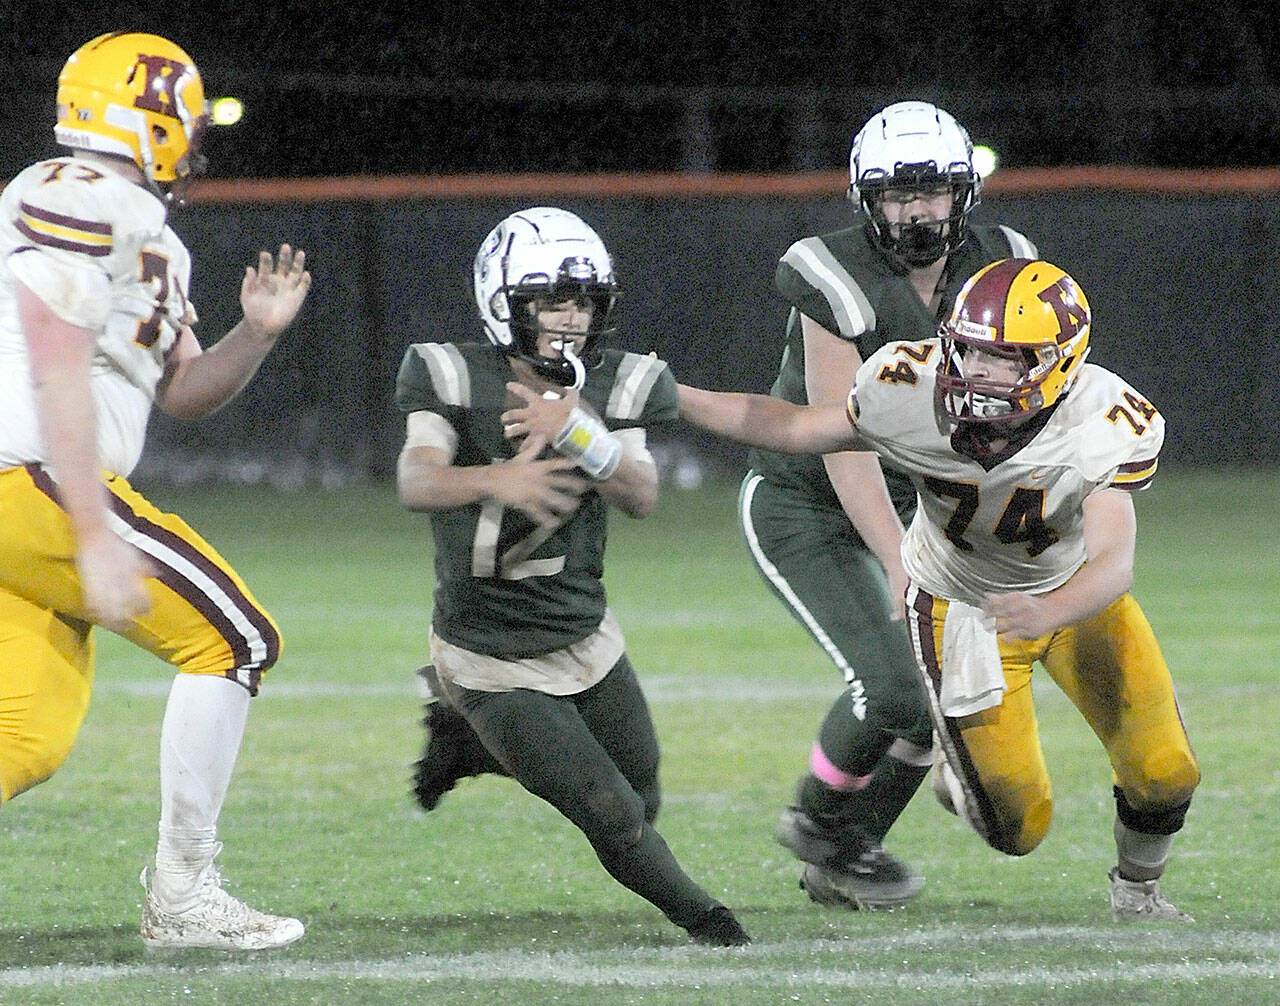 Port Angeles’ Kason Albaugh, center, runs between Kingston’s Tyler Rose, left, and Jackson Glammeier, right, as teammate Hunter Flores looks on from behind on Friday night in Port Angeles. (Keith Thorpe/Peninsula Daily News)